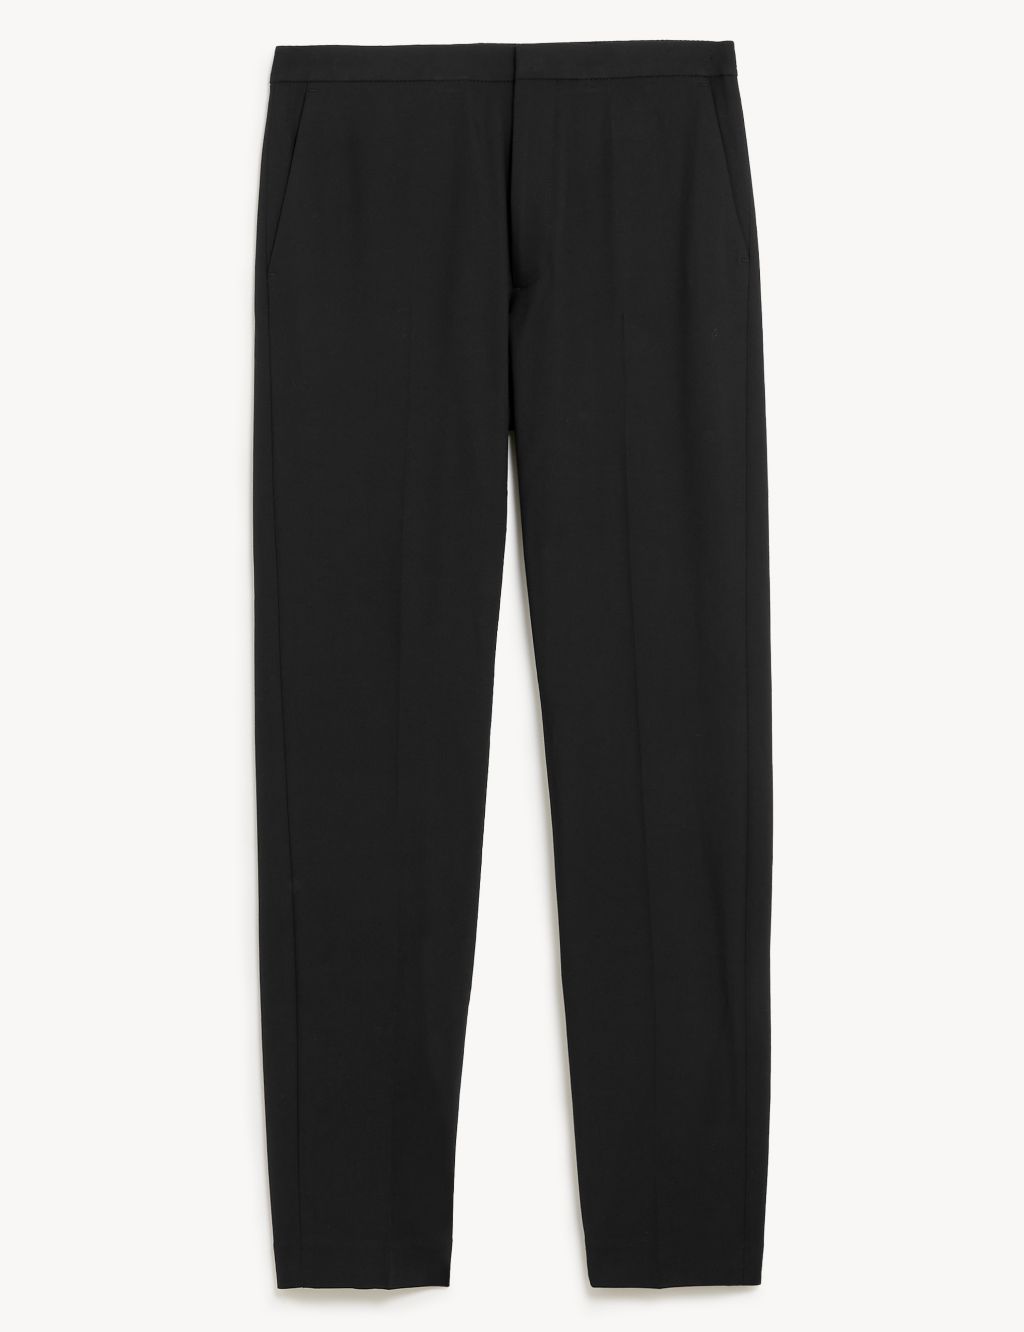 Textured 360 Flex Trousers image 7